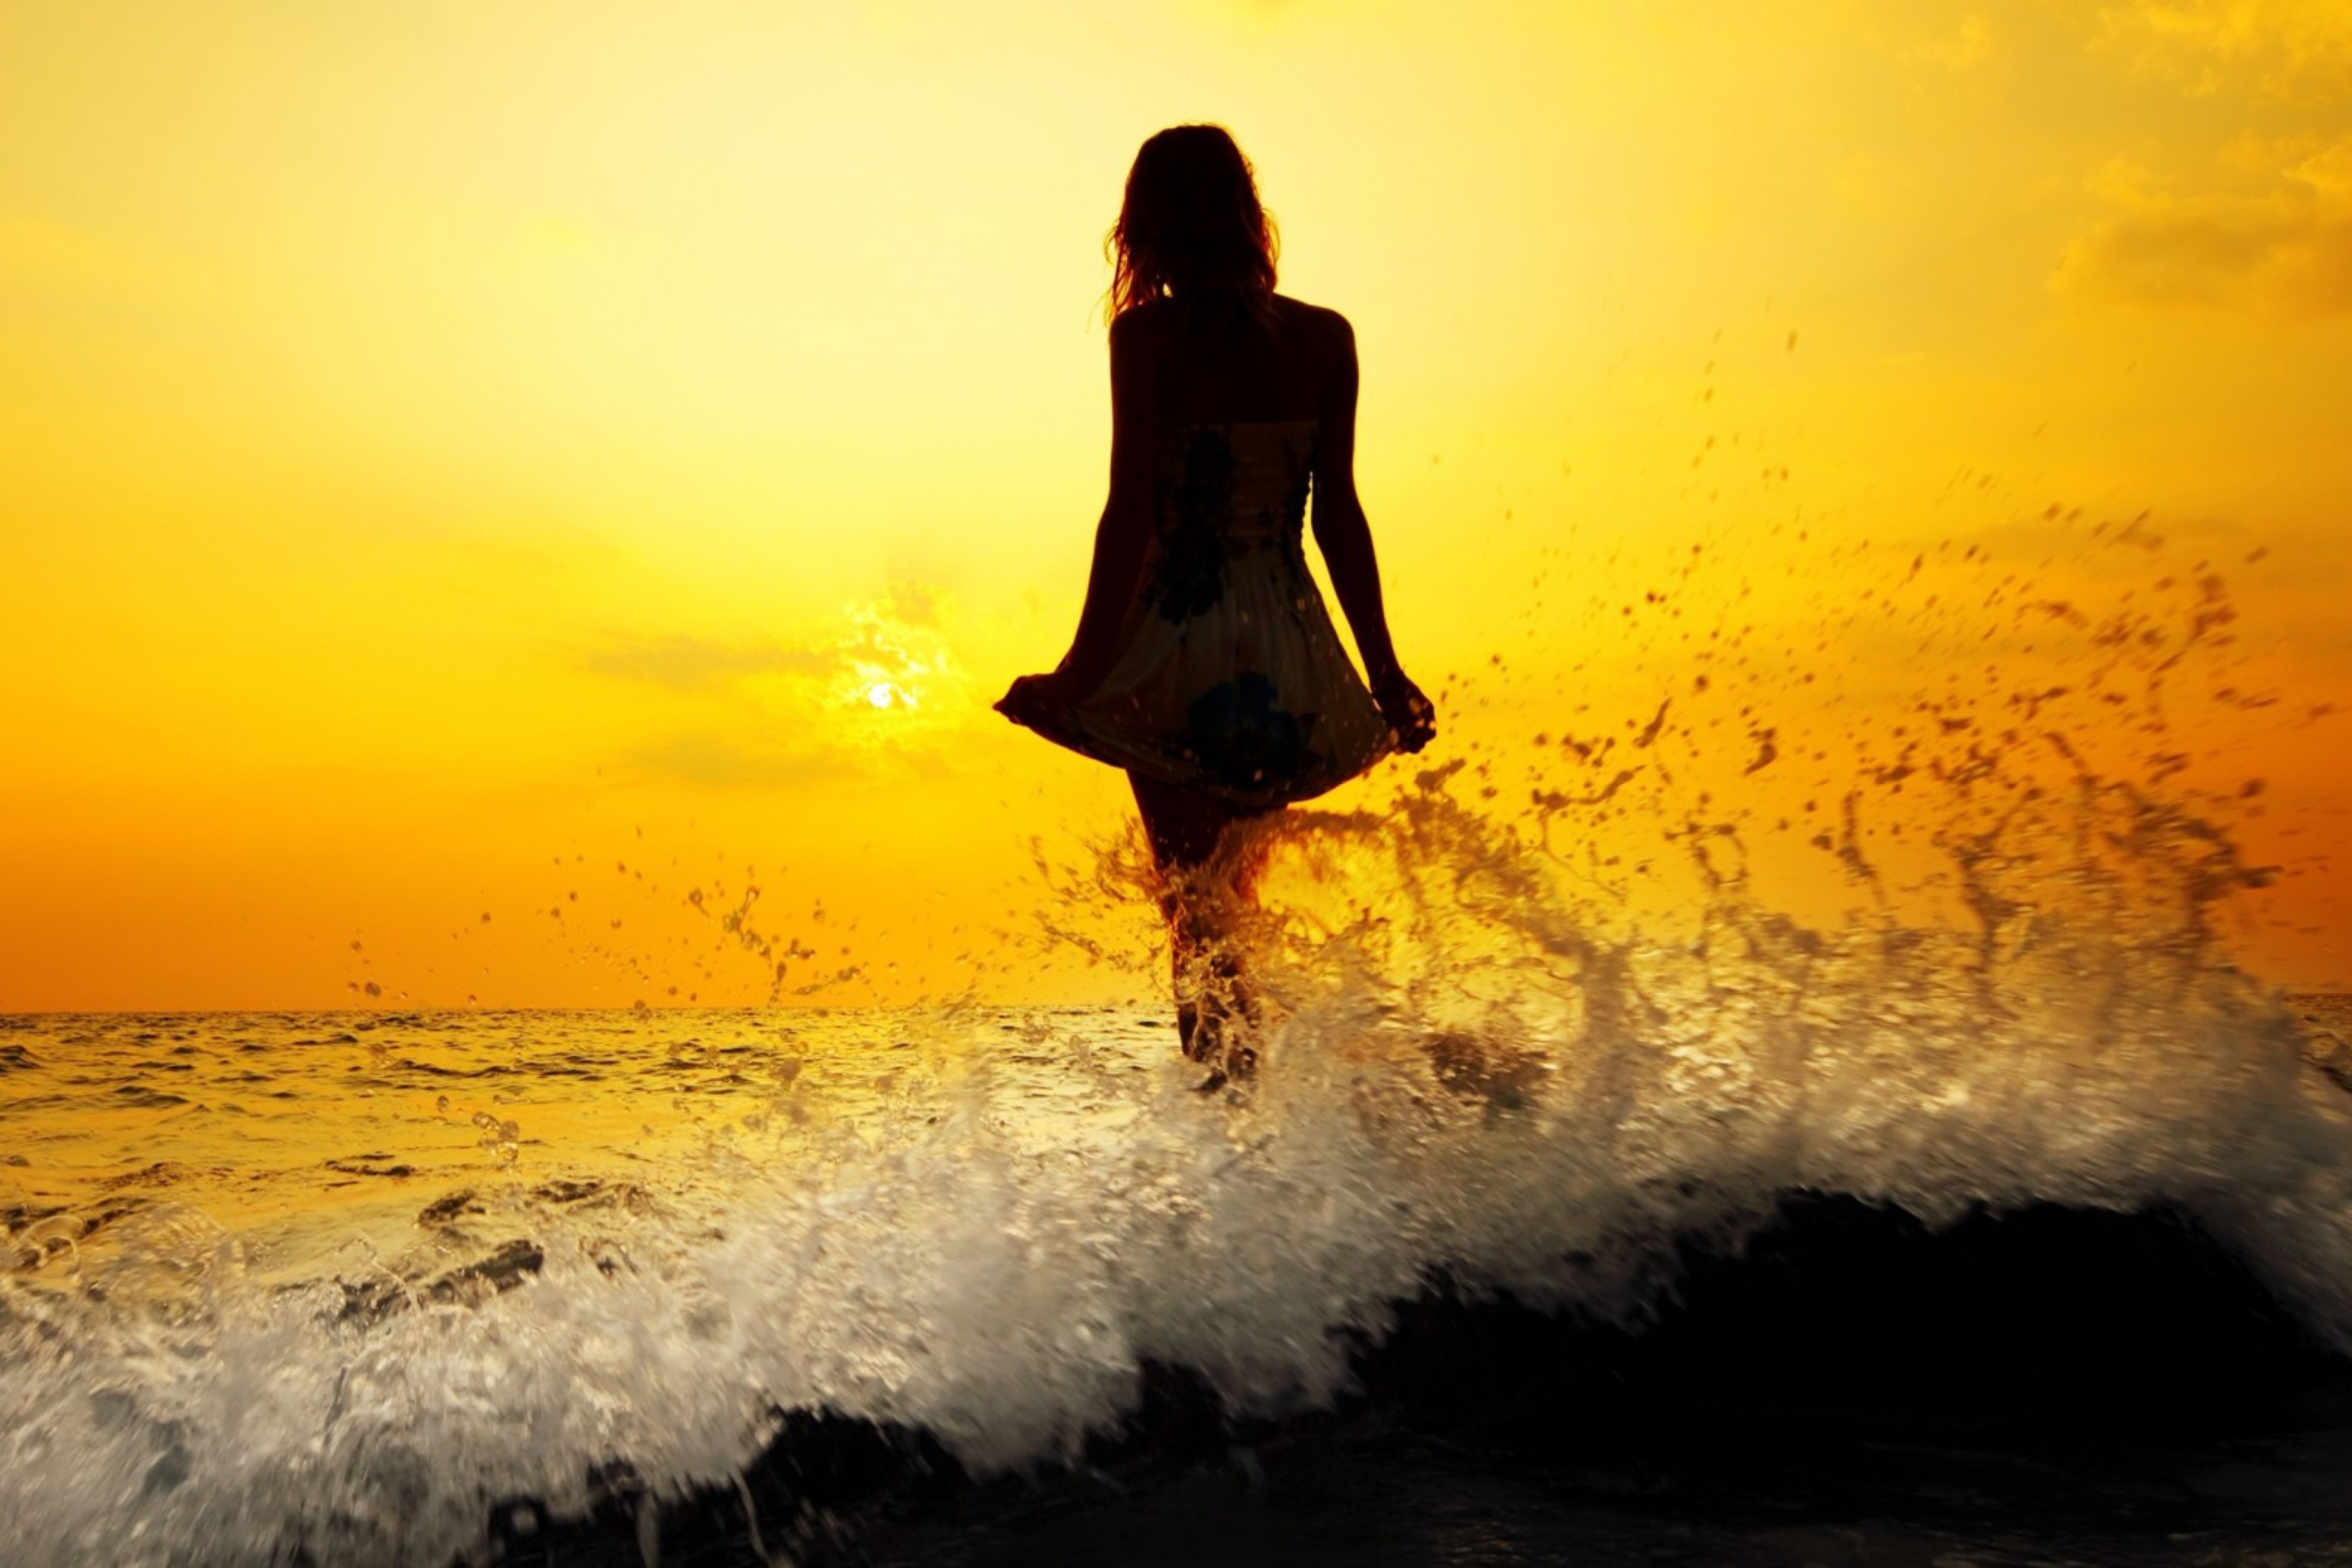 Girl Silhouette In Sea Waves At Sunset screenshot #1 2880x1920